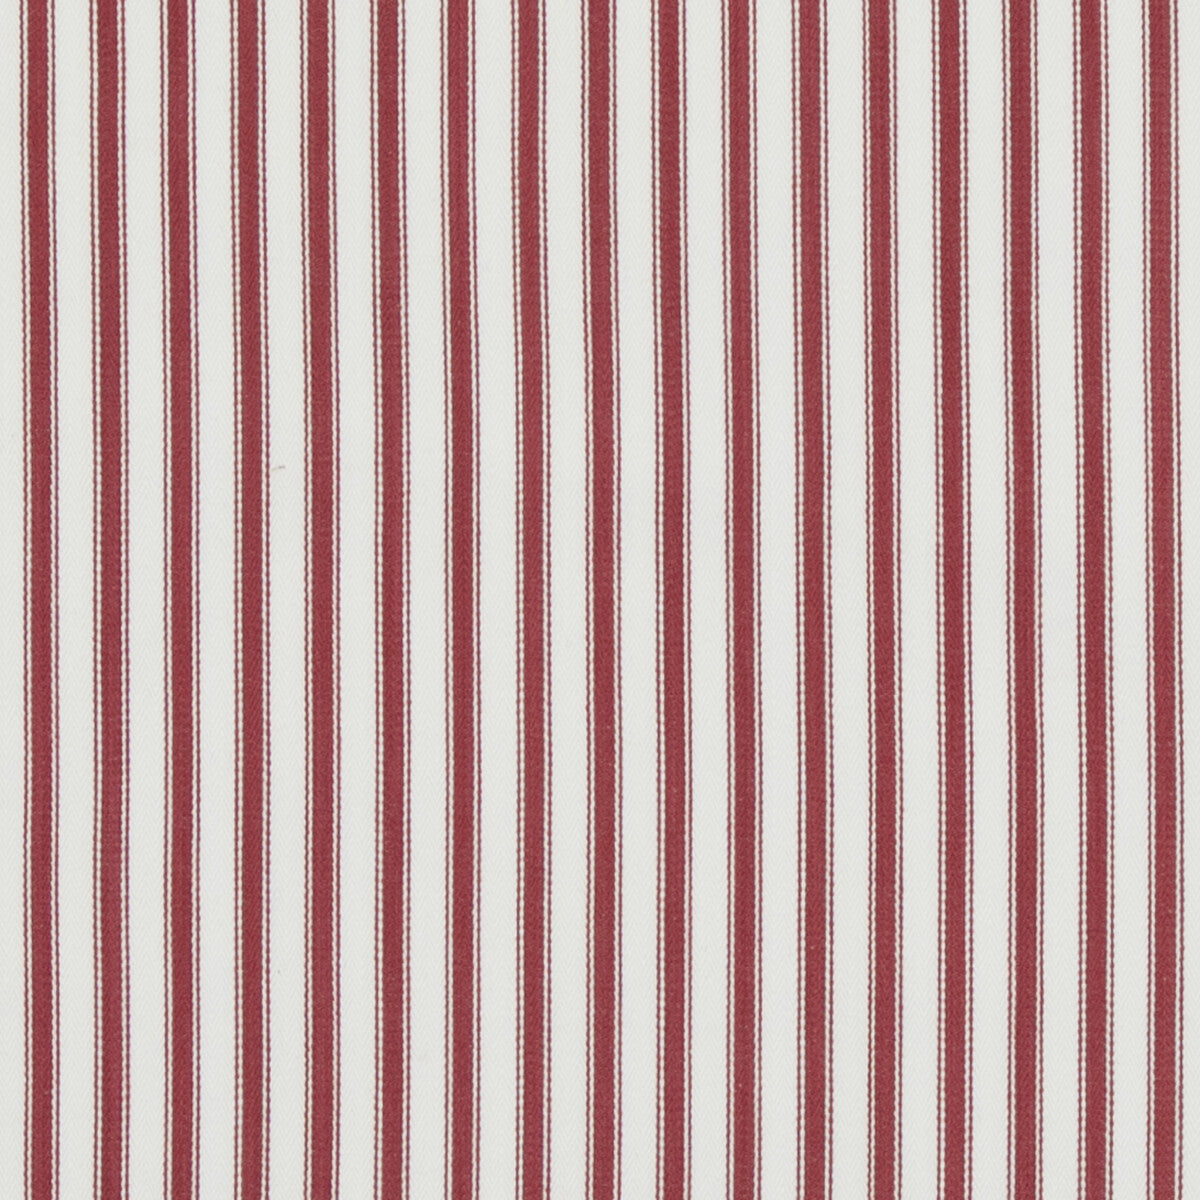 Sherborne Ticking fabric in red color - pattern PF50505.450.0 - by Baker Lifestyle in the Bridport collection